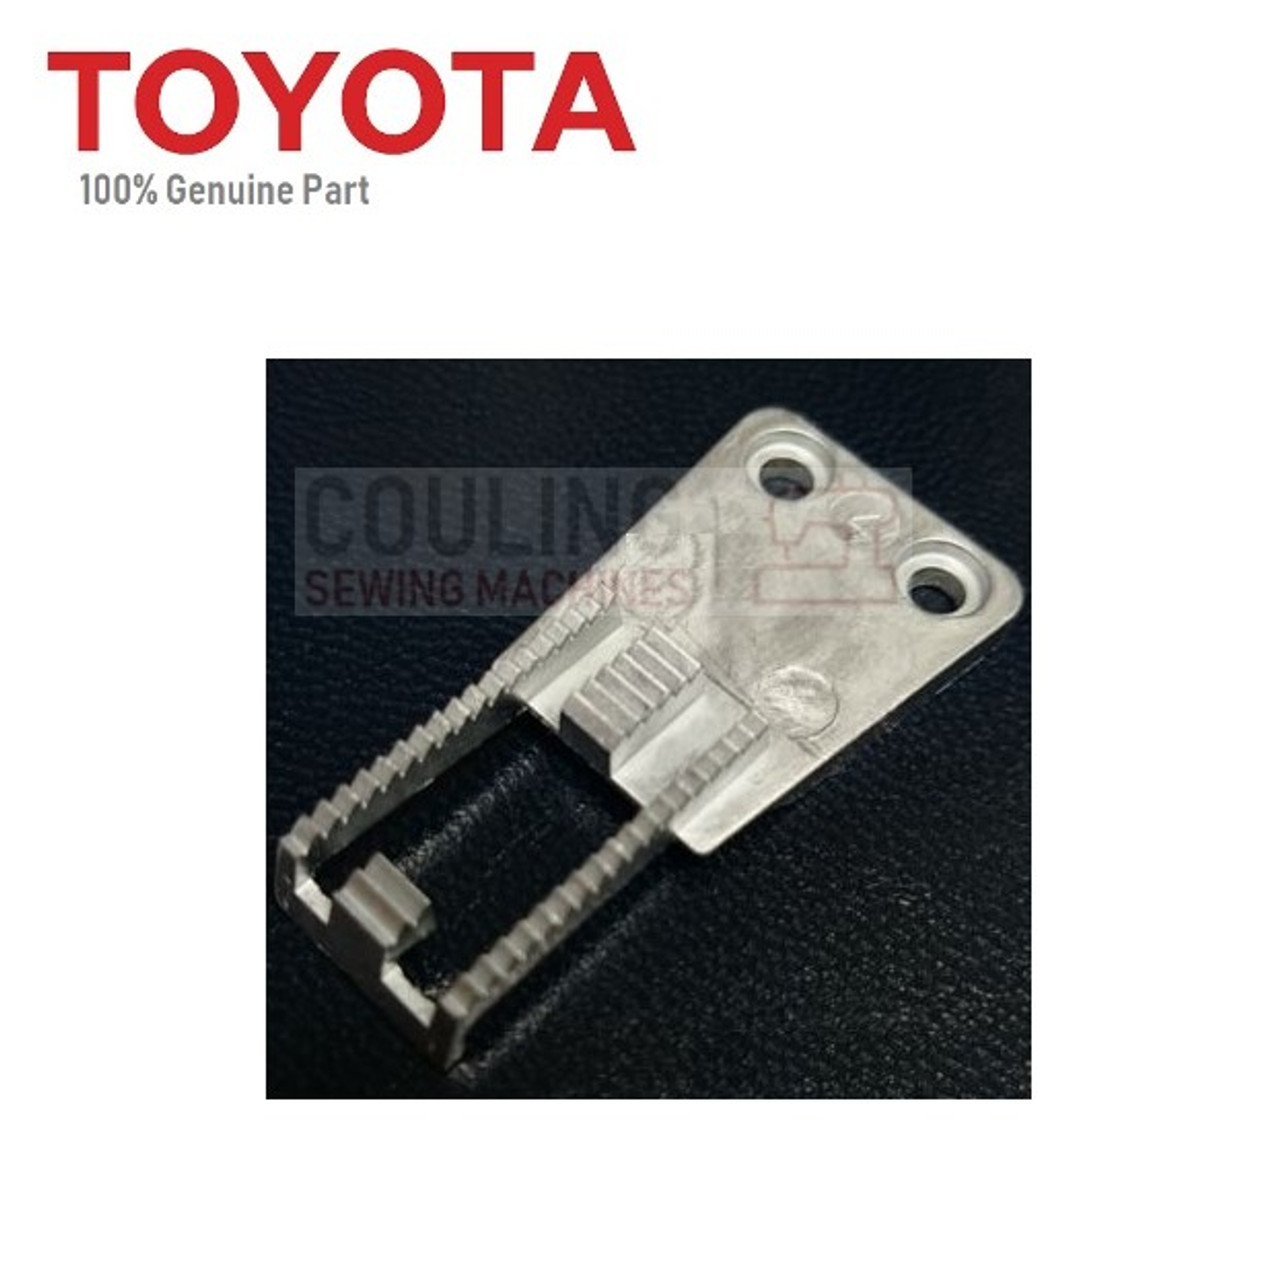 Toyota Standard Feed dog RS2000 Series